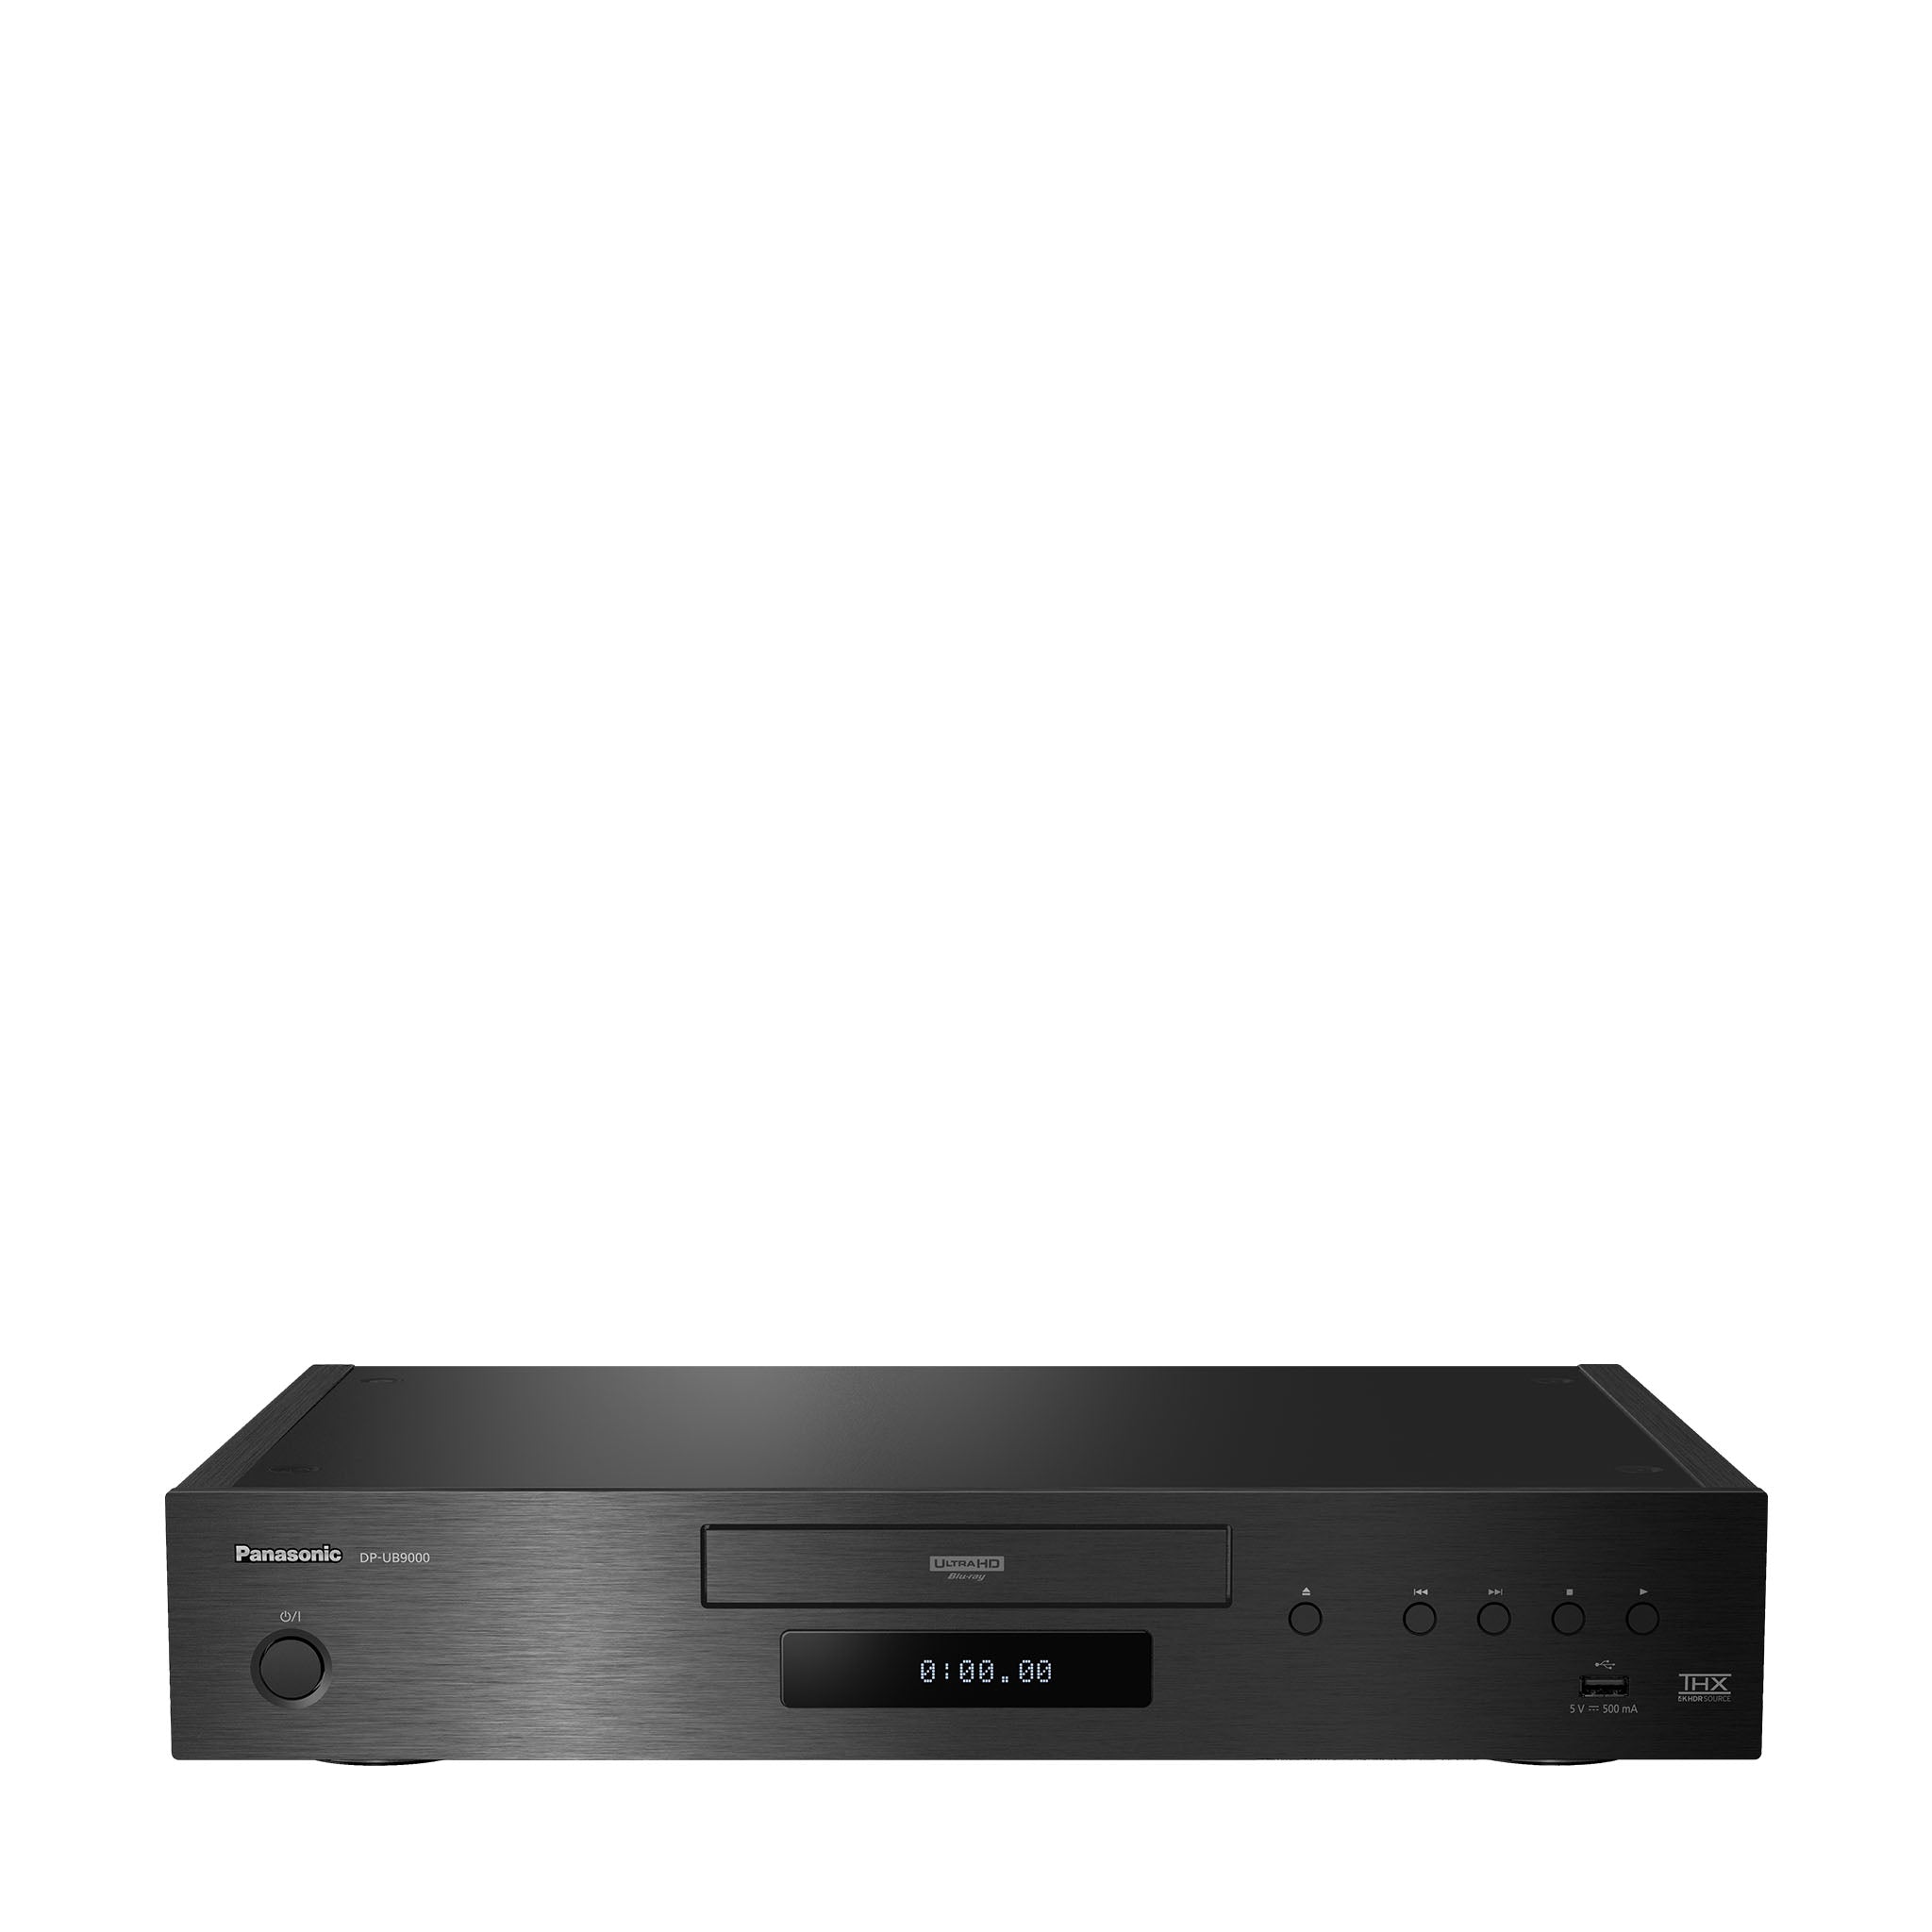 Panasonic Reference Class 4K Ultra HD Blu-ray Player with Dolby Vision,  Ultra HD Premium Video Playback, HDR10+, Hi-Res Audio - DP-UB9000P1K